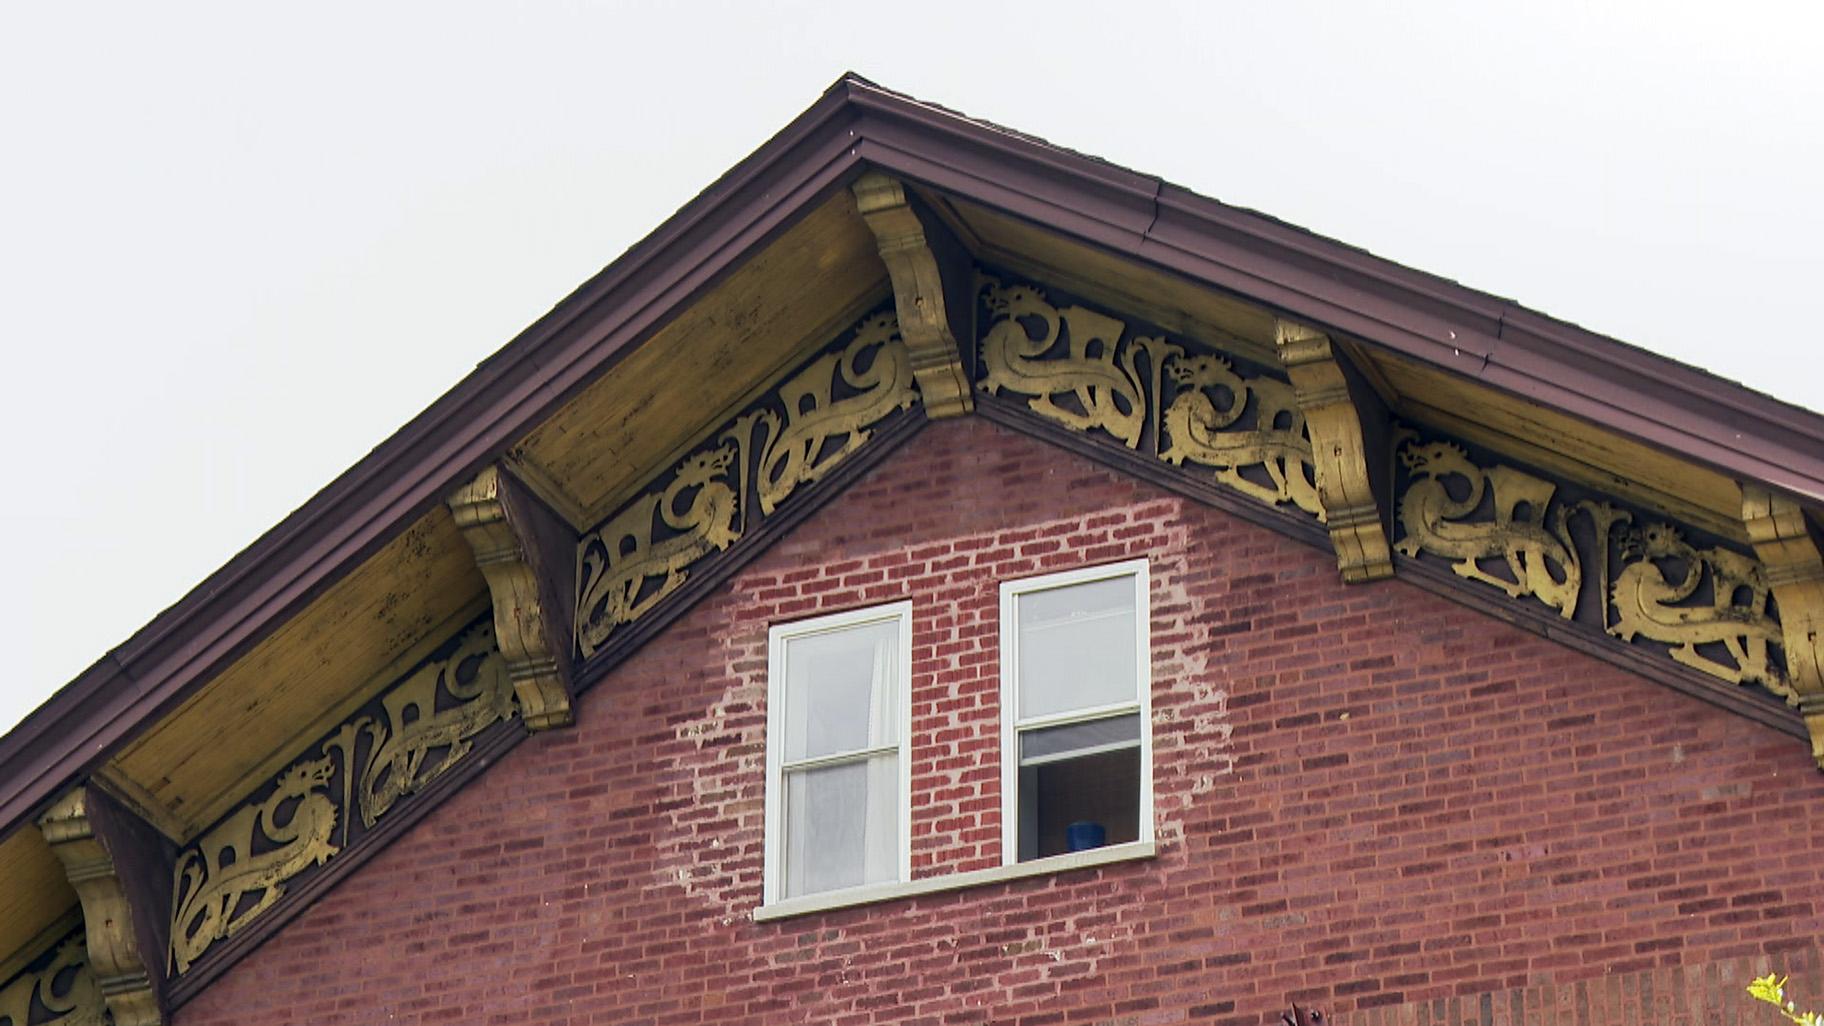 The Norske Club has a distinctive Scandinavian touch, as you can still see in the dragon motif trim along the roofline – a popular Norwegian symbol from the Viking era. (WTTW News)